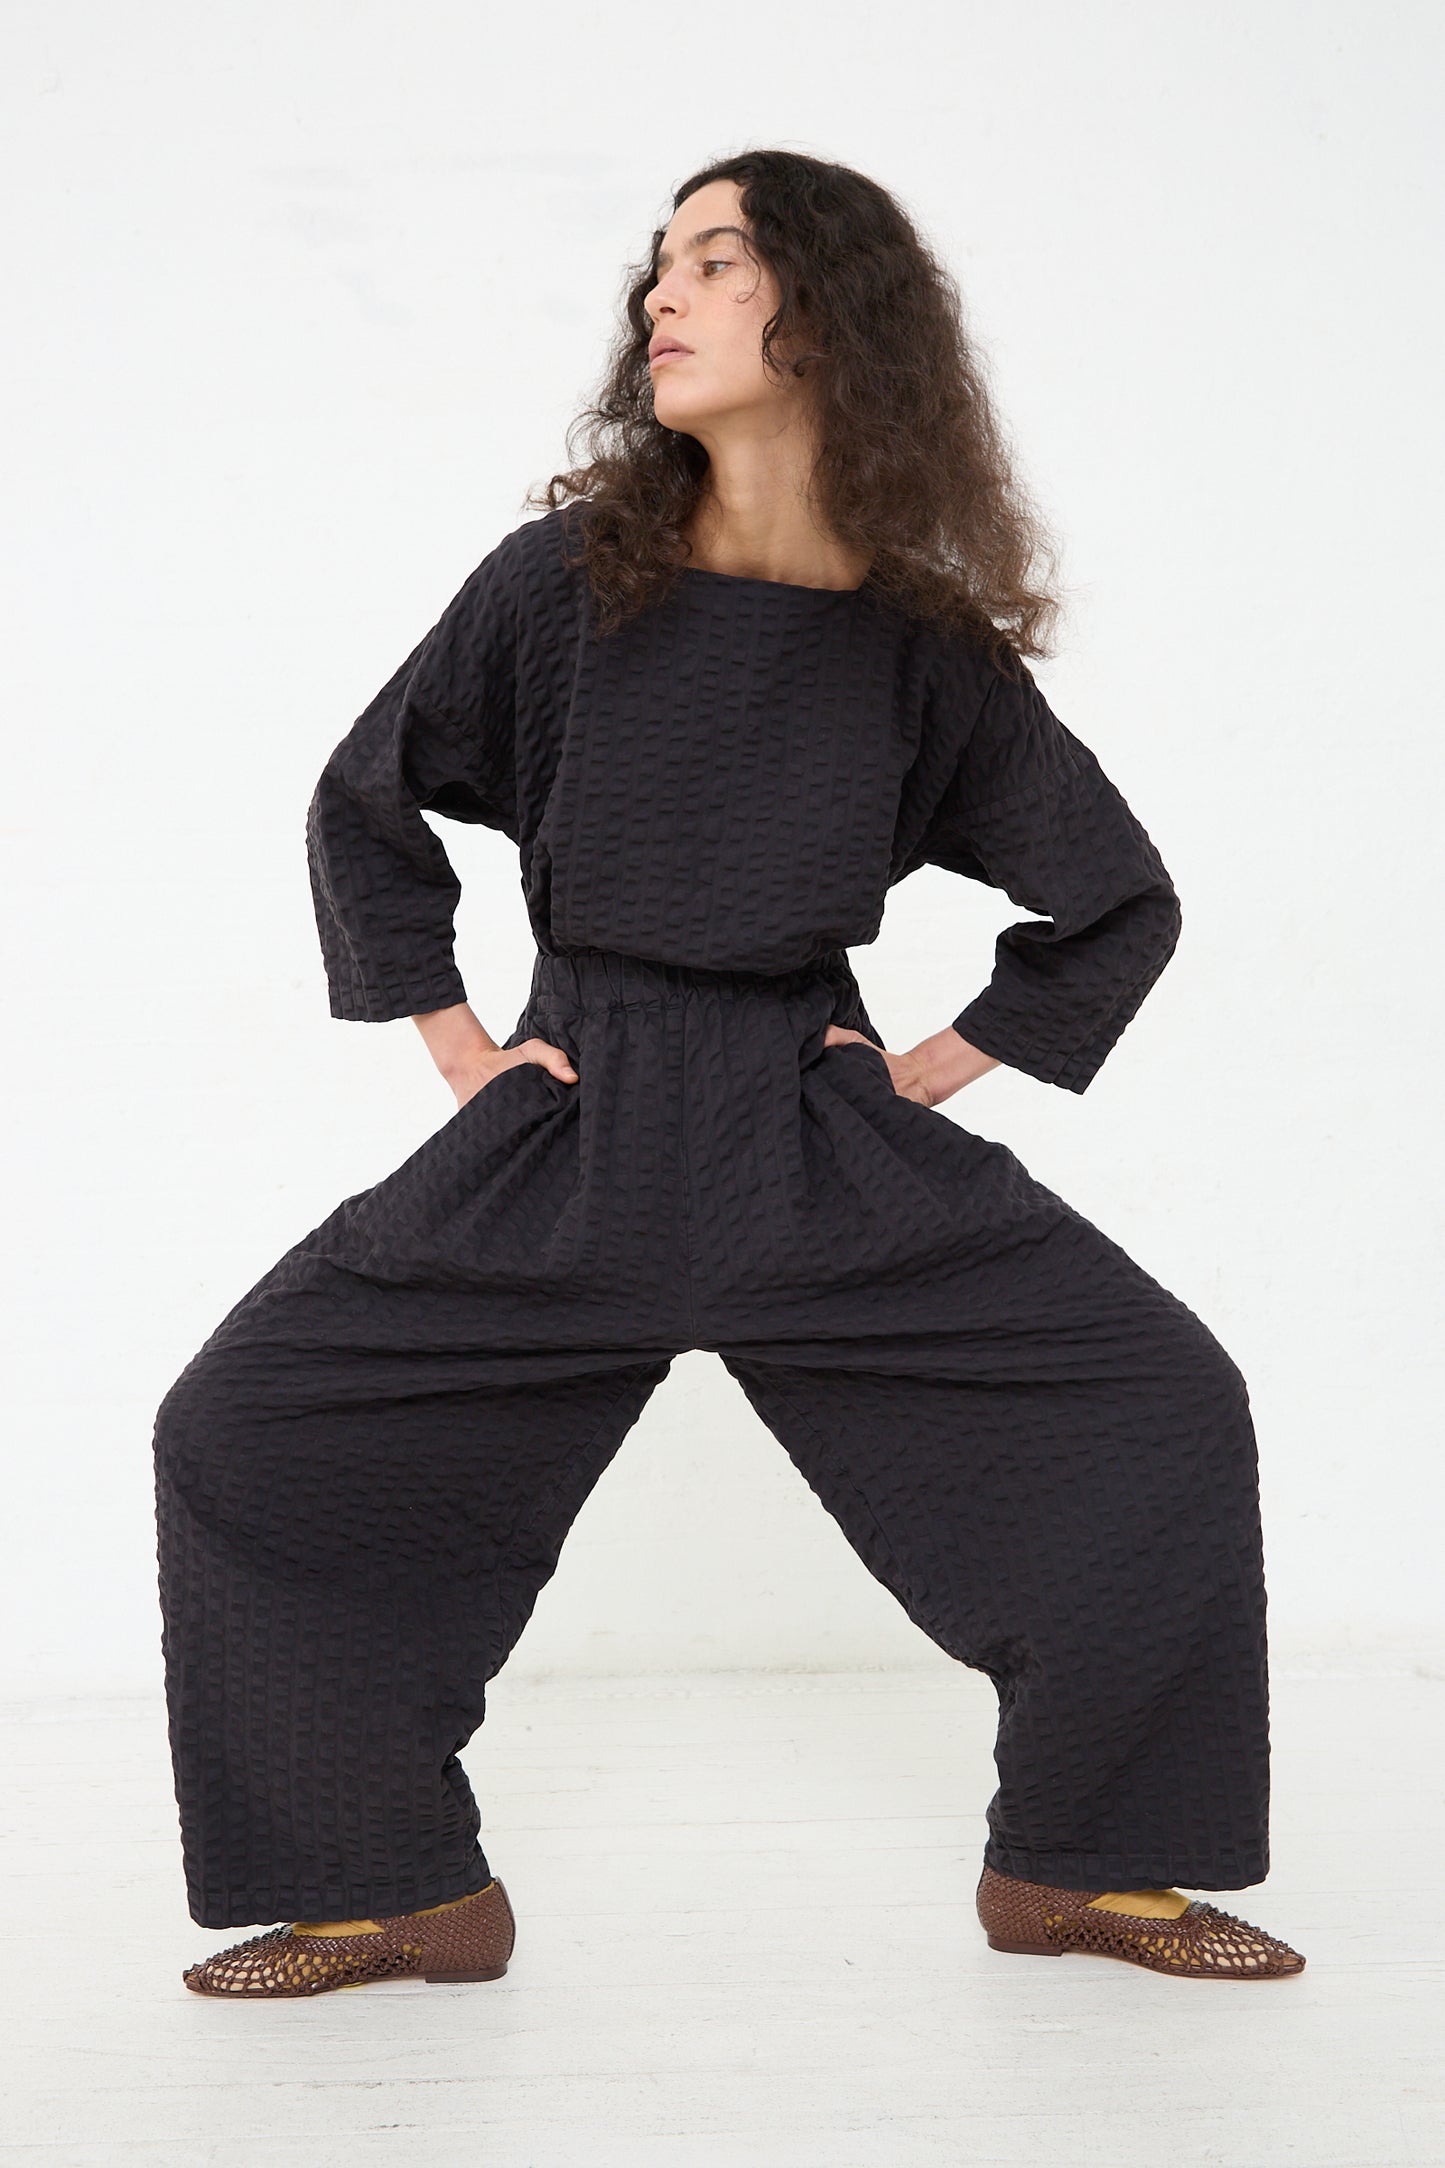 A person stands with hands on hips, wearing a textured Black Crane Cotton Seersucker Wide Pant in Ink Black jumpsuit and patterned flat shoes against a plain white background.